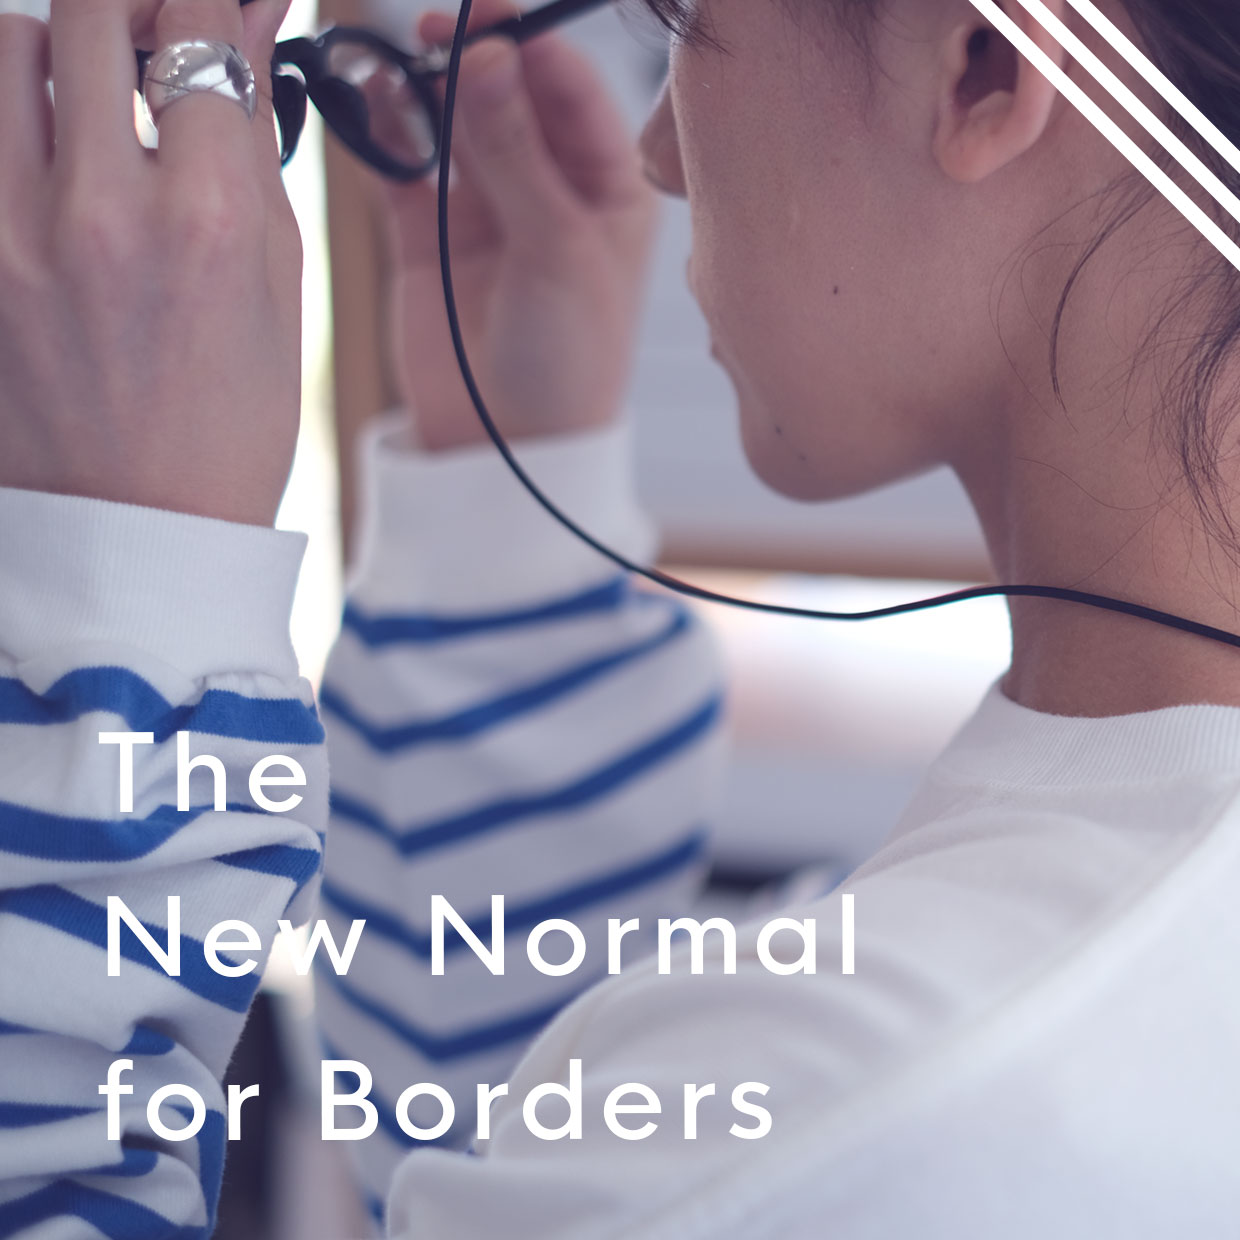 The New Normal for Borders